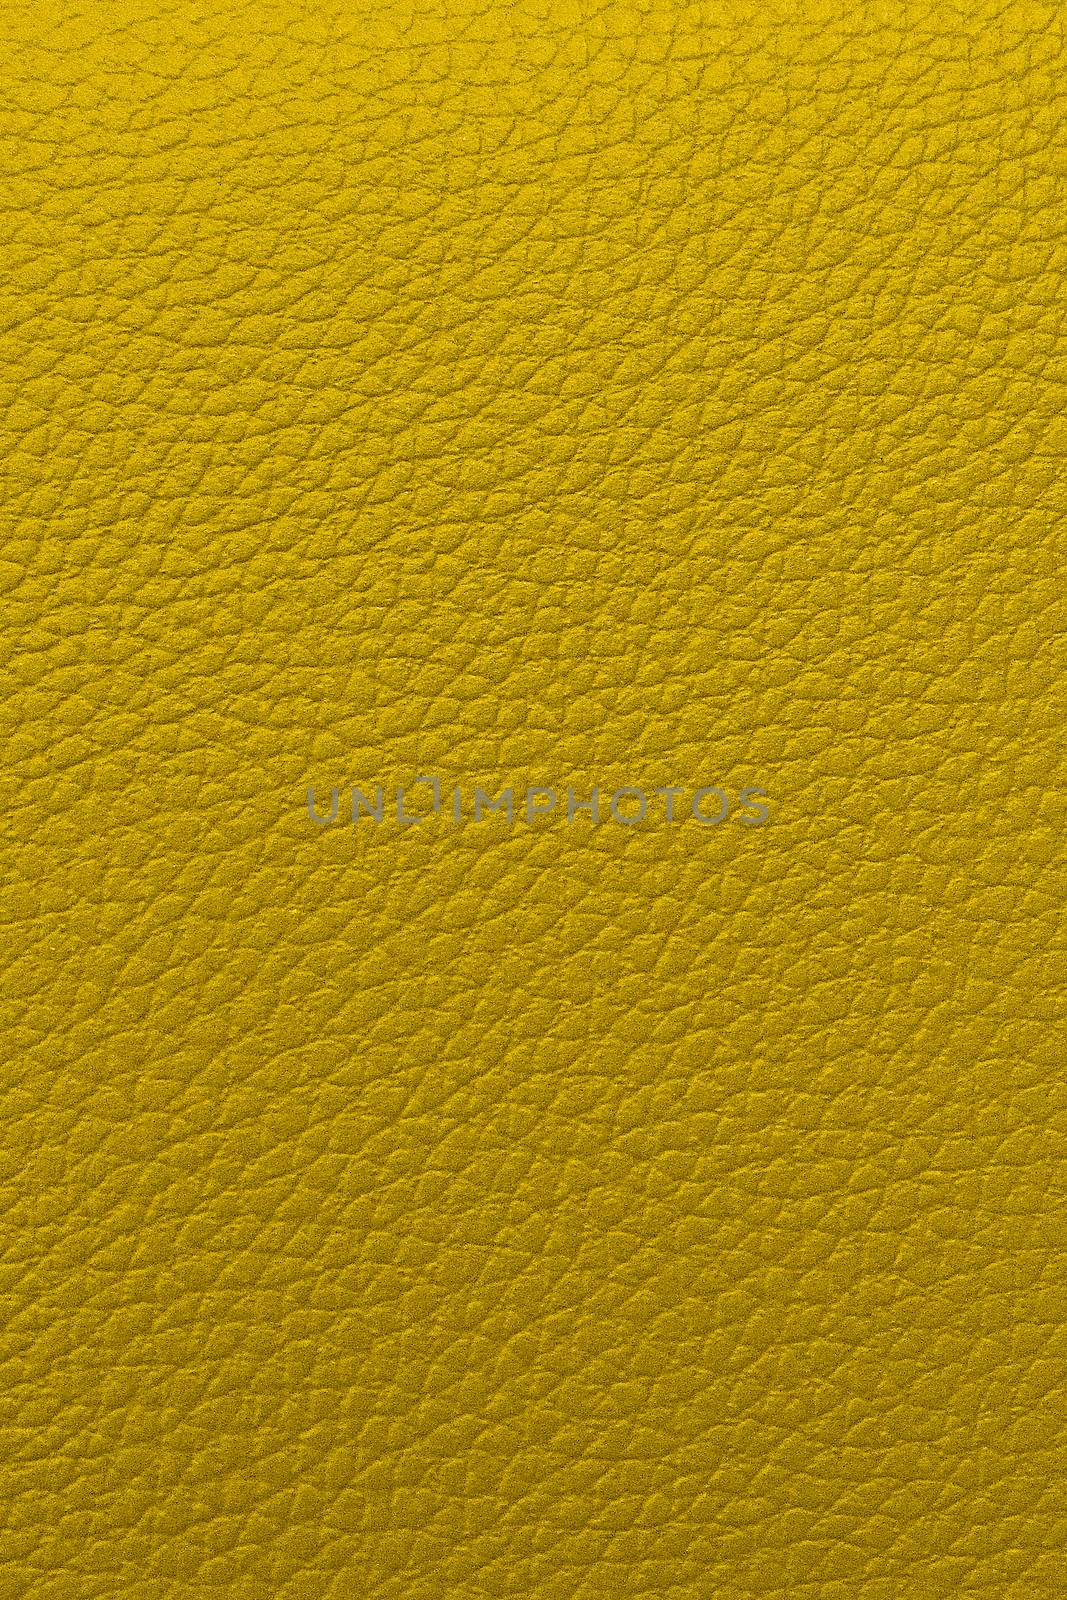 Leather or vinyl color sample background or texture. Brown color, Cream or Beige color and gray or grey color.